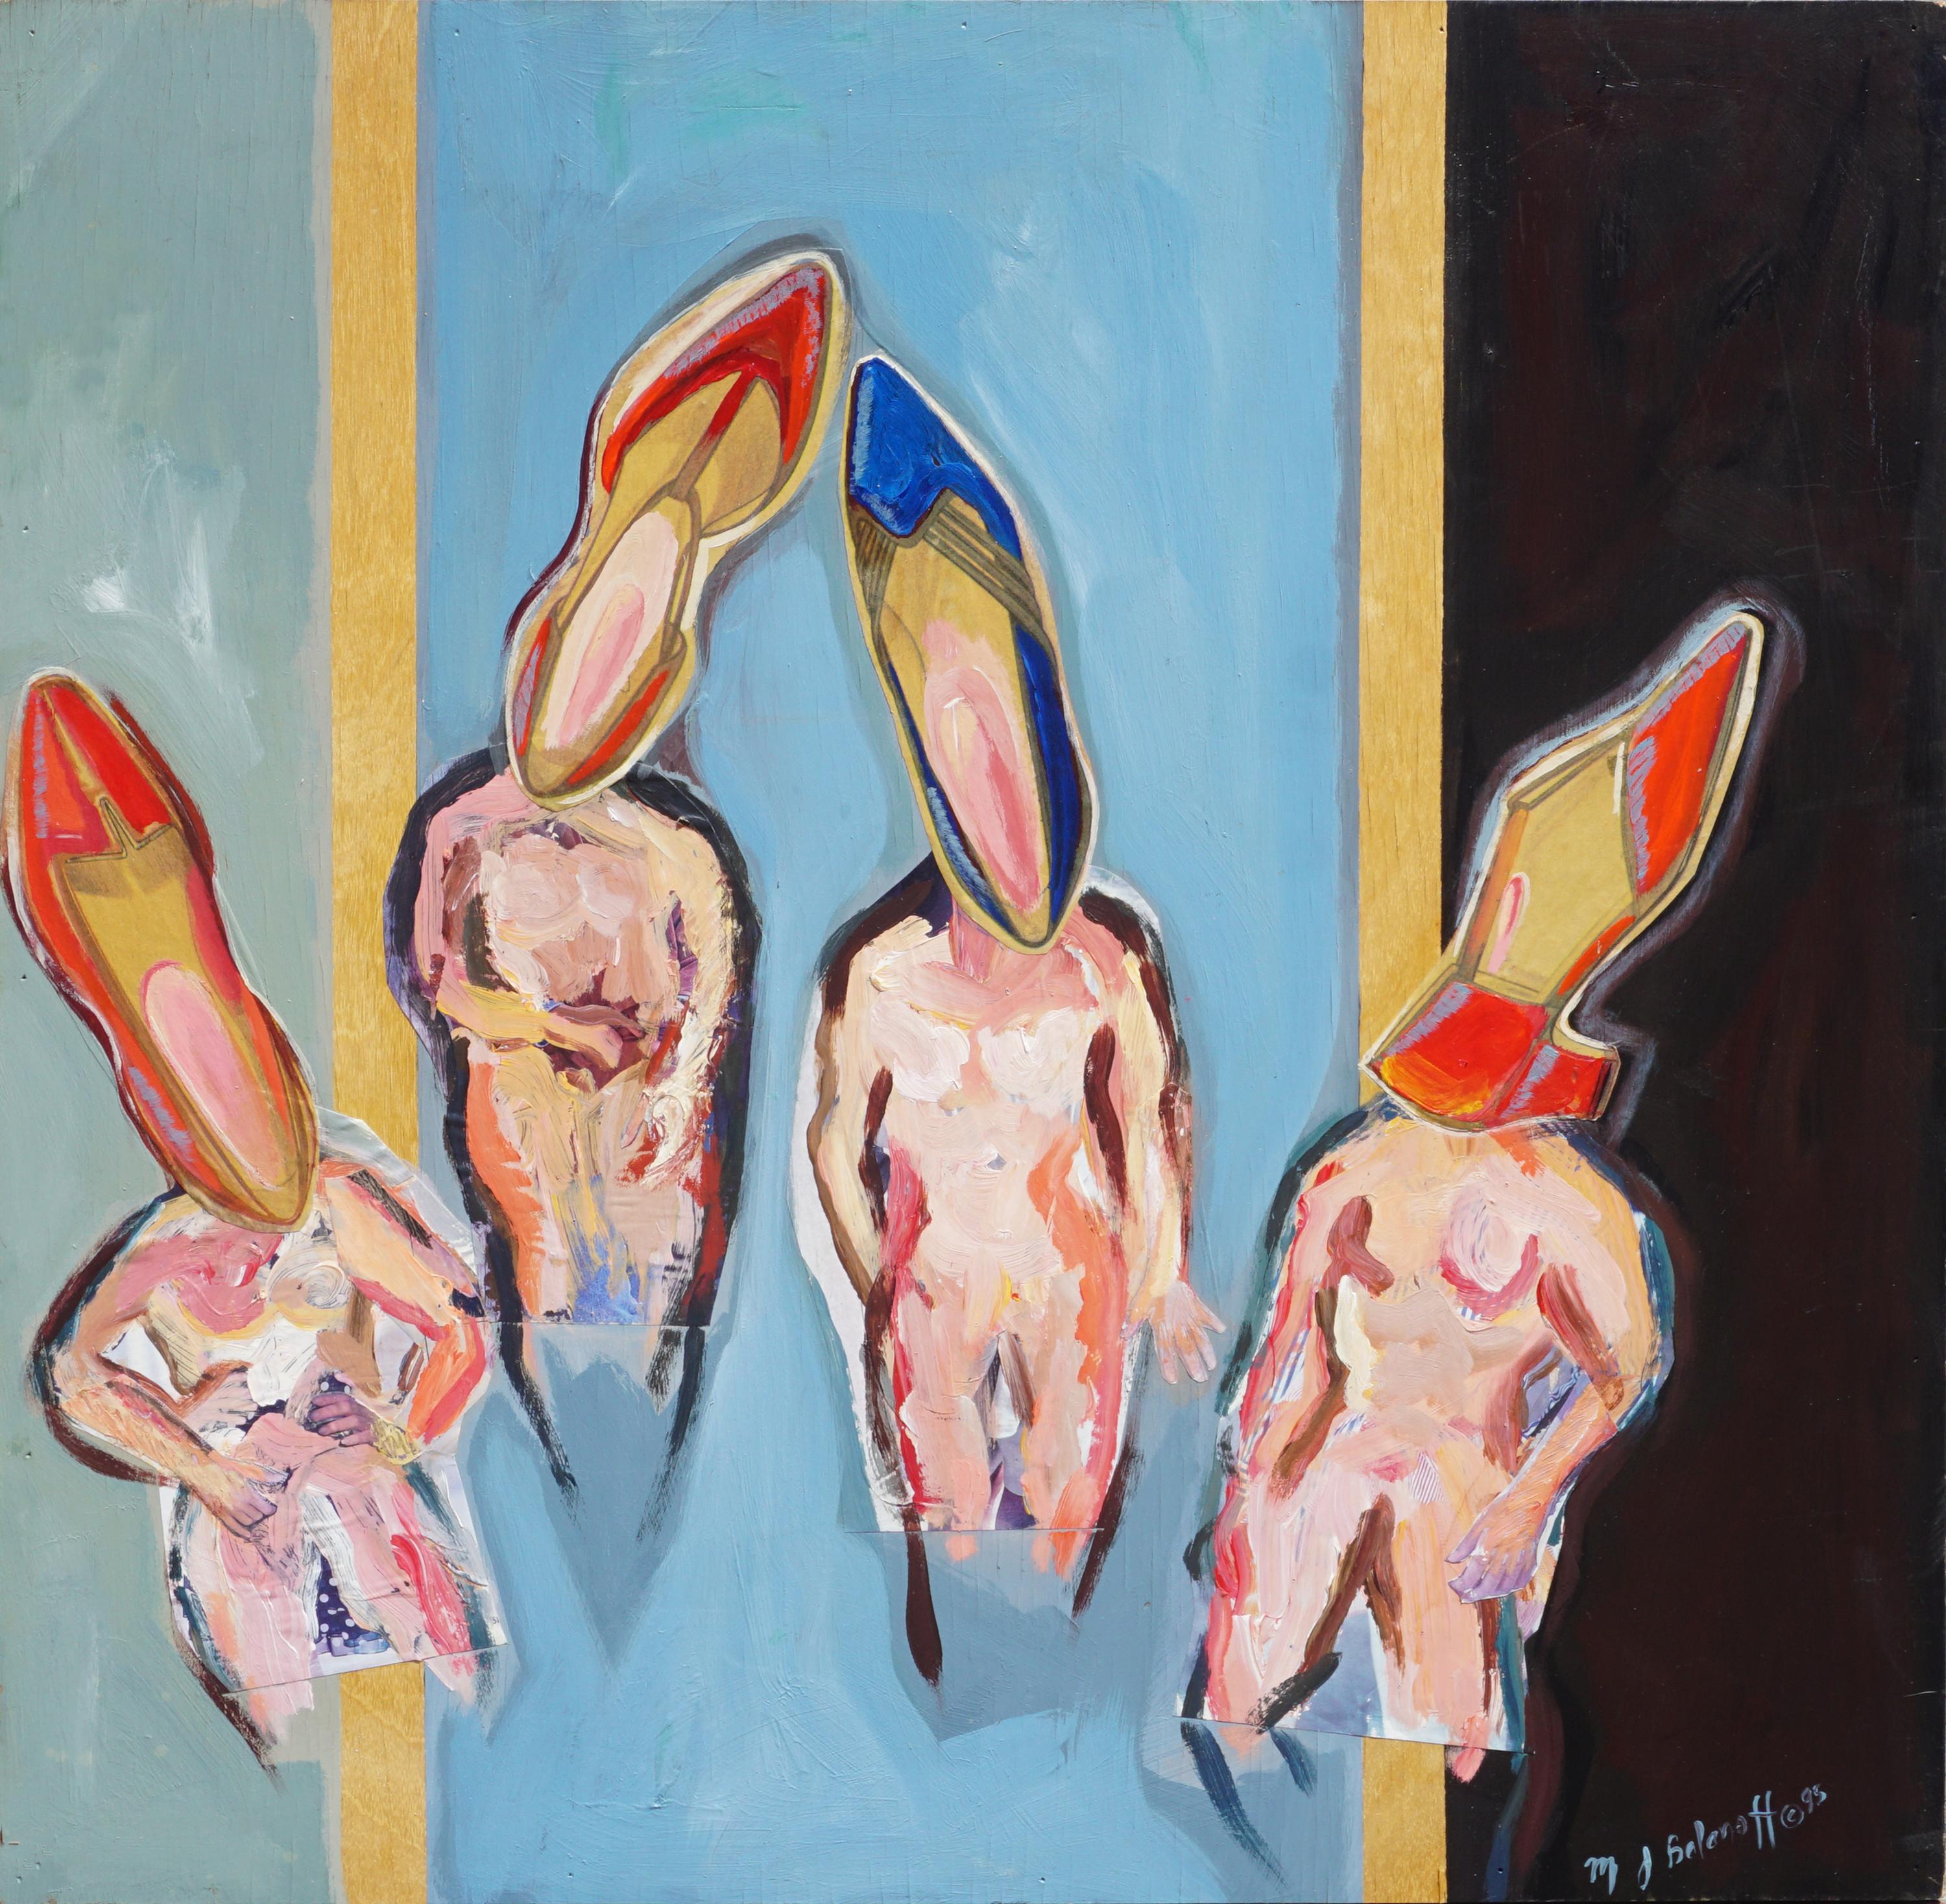 M. Jane Balanoff Abstract Painting - Shoe Fetish! Whimsical Surrealist Abstract Figurative with High Heel Heads 